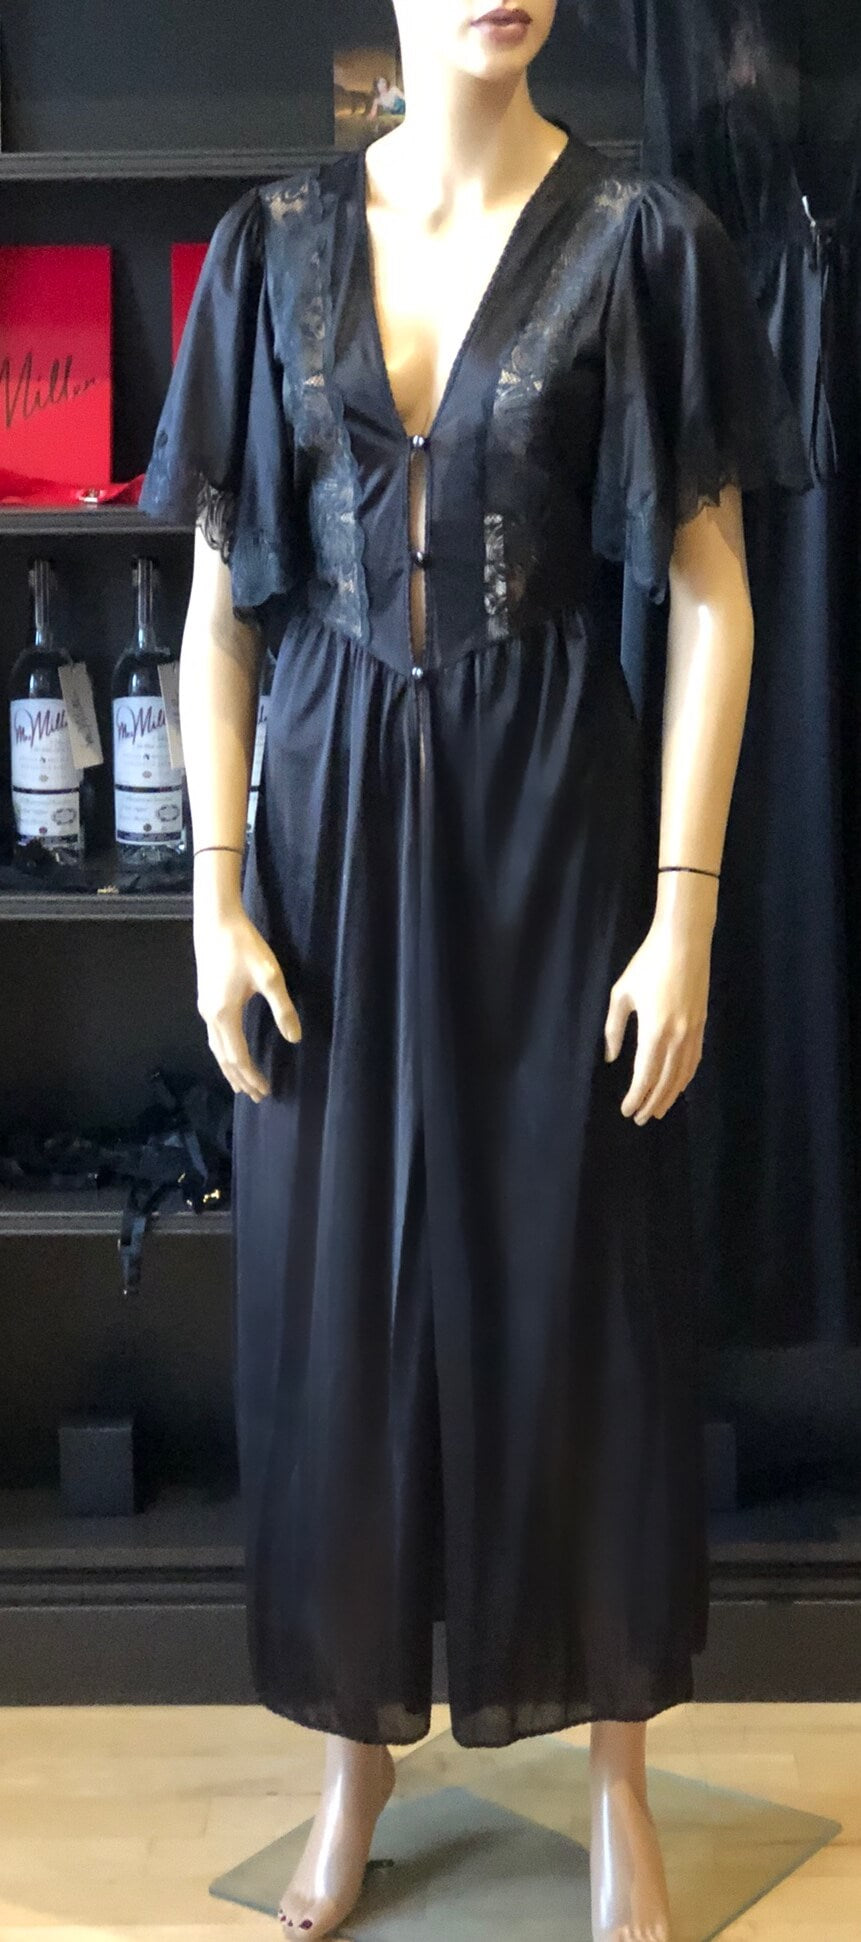 Long dress with 3 buttons